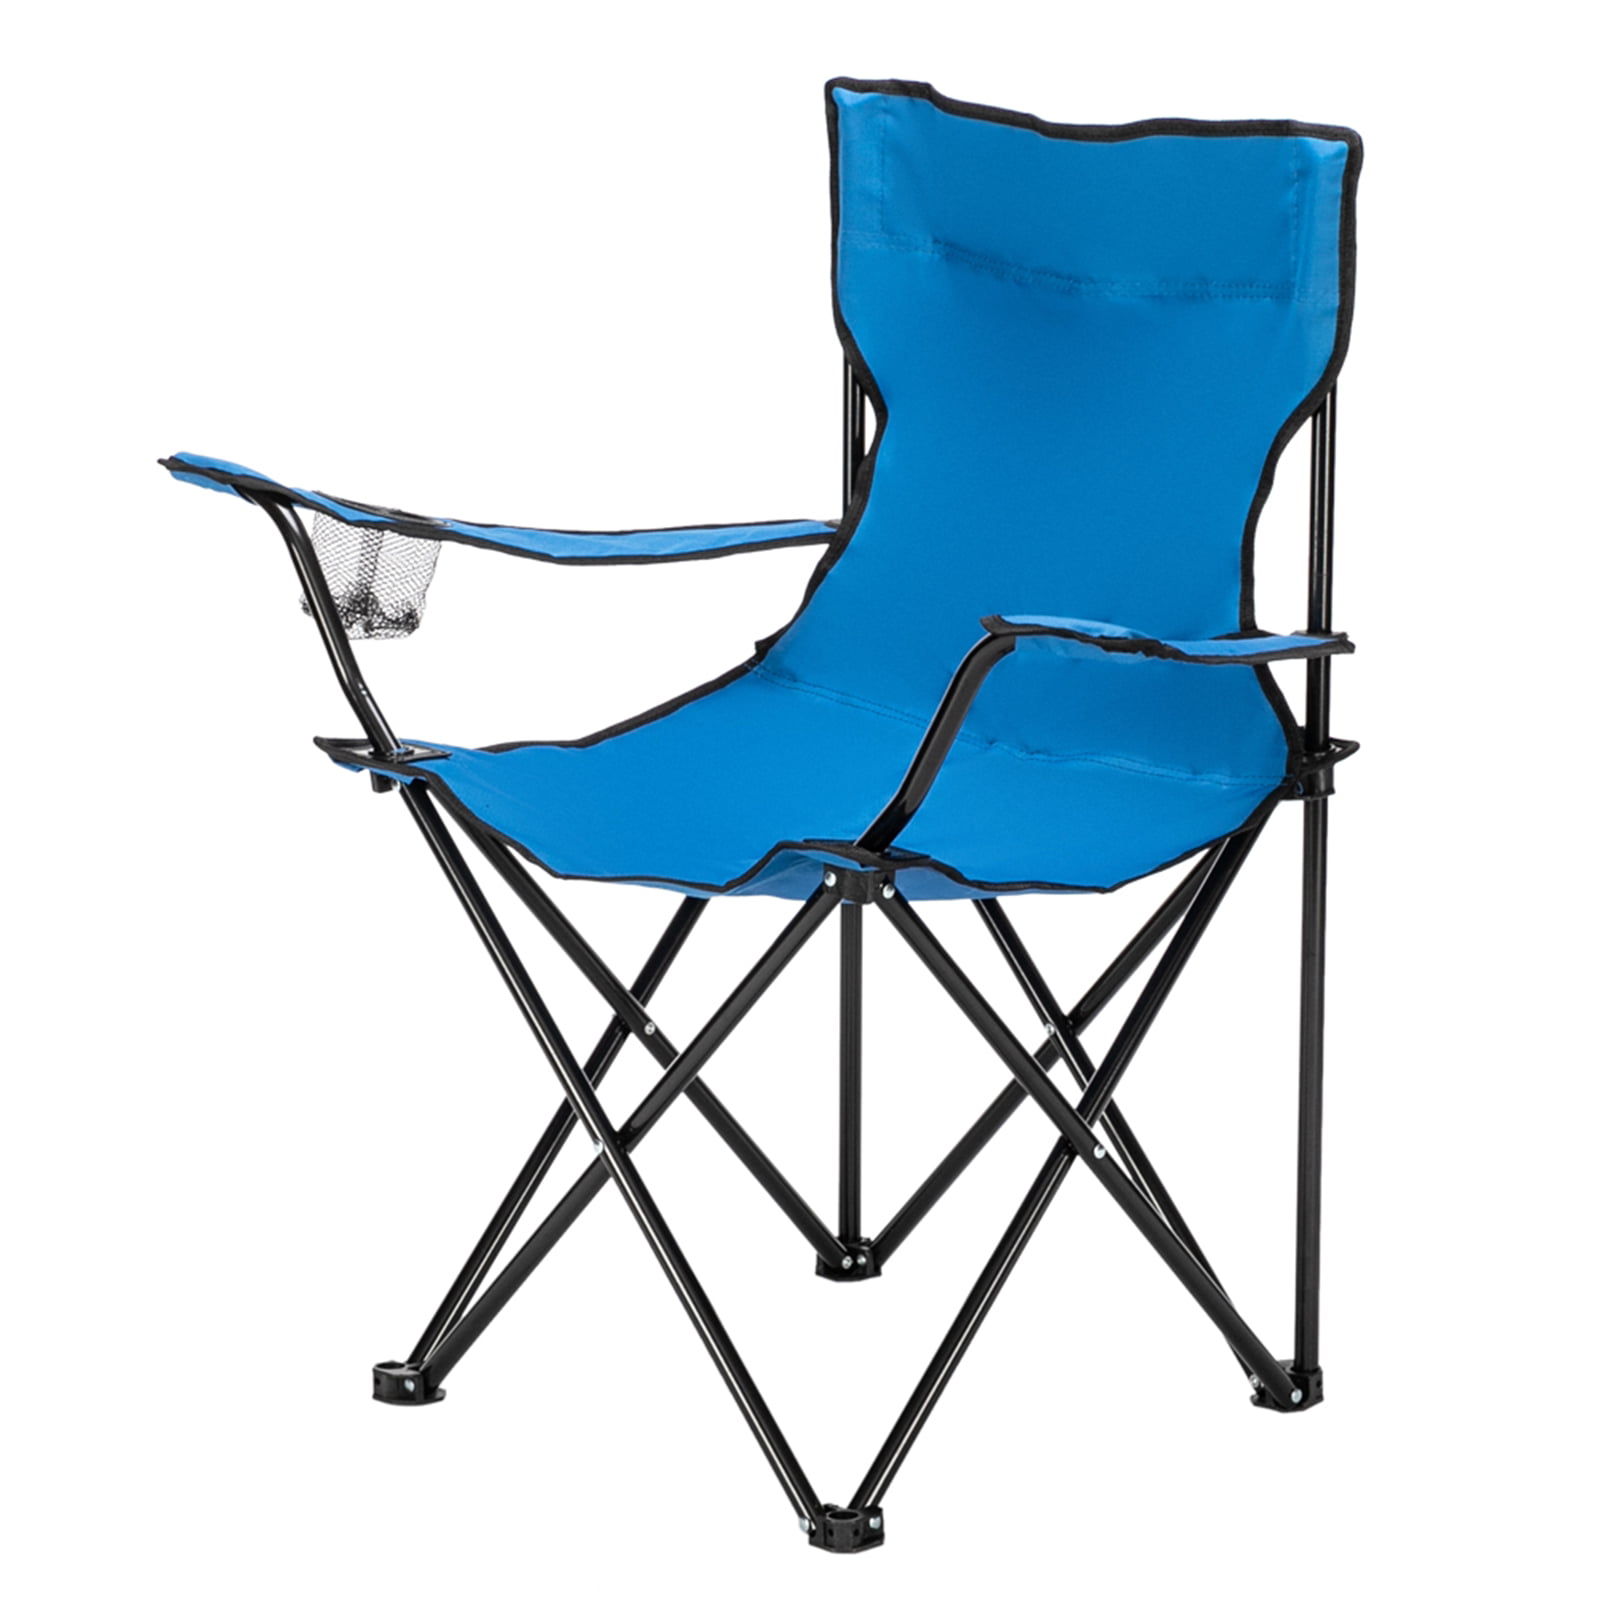 Folding Camping Chair Garden Outdoor Hiking Luxury Cup Holder Heavy Duty Blue 